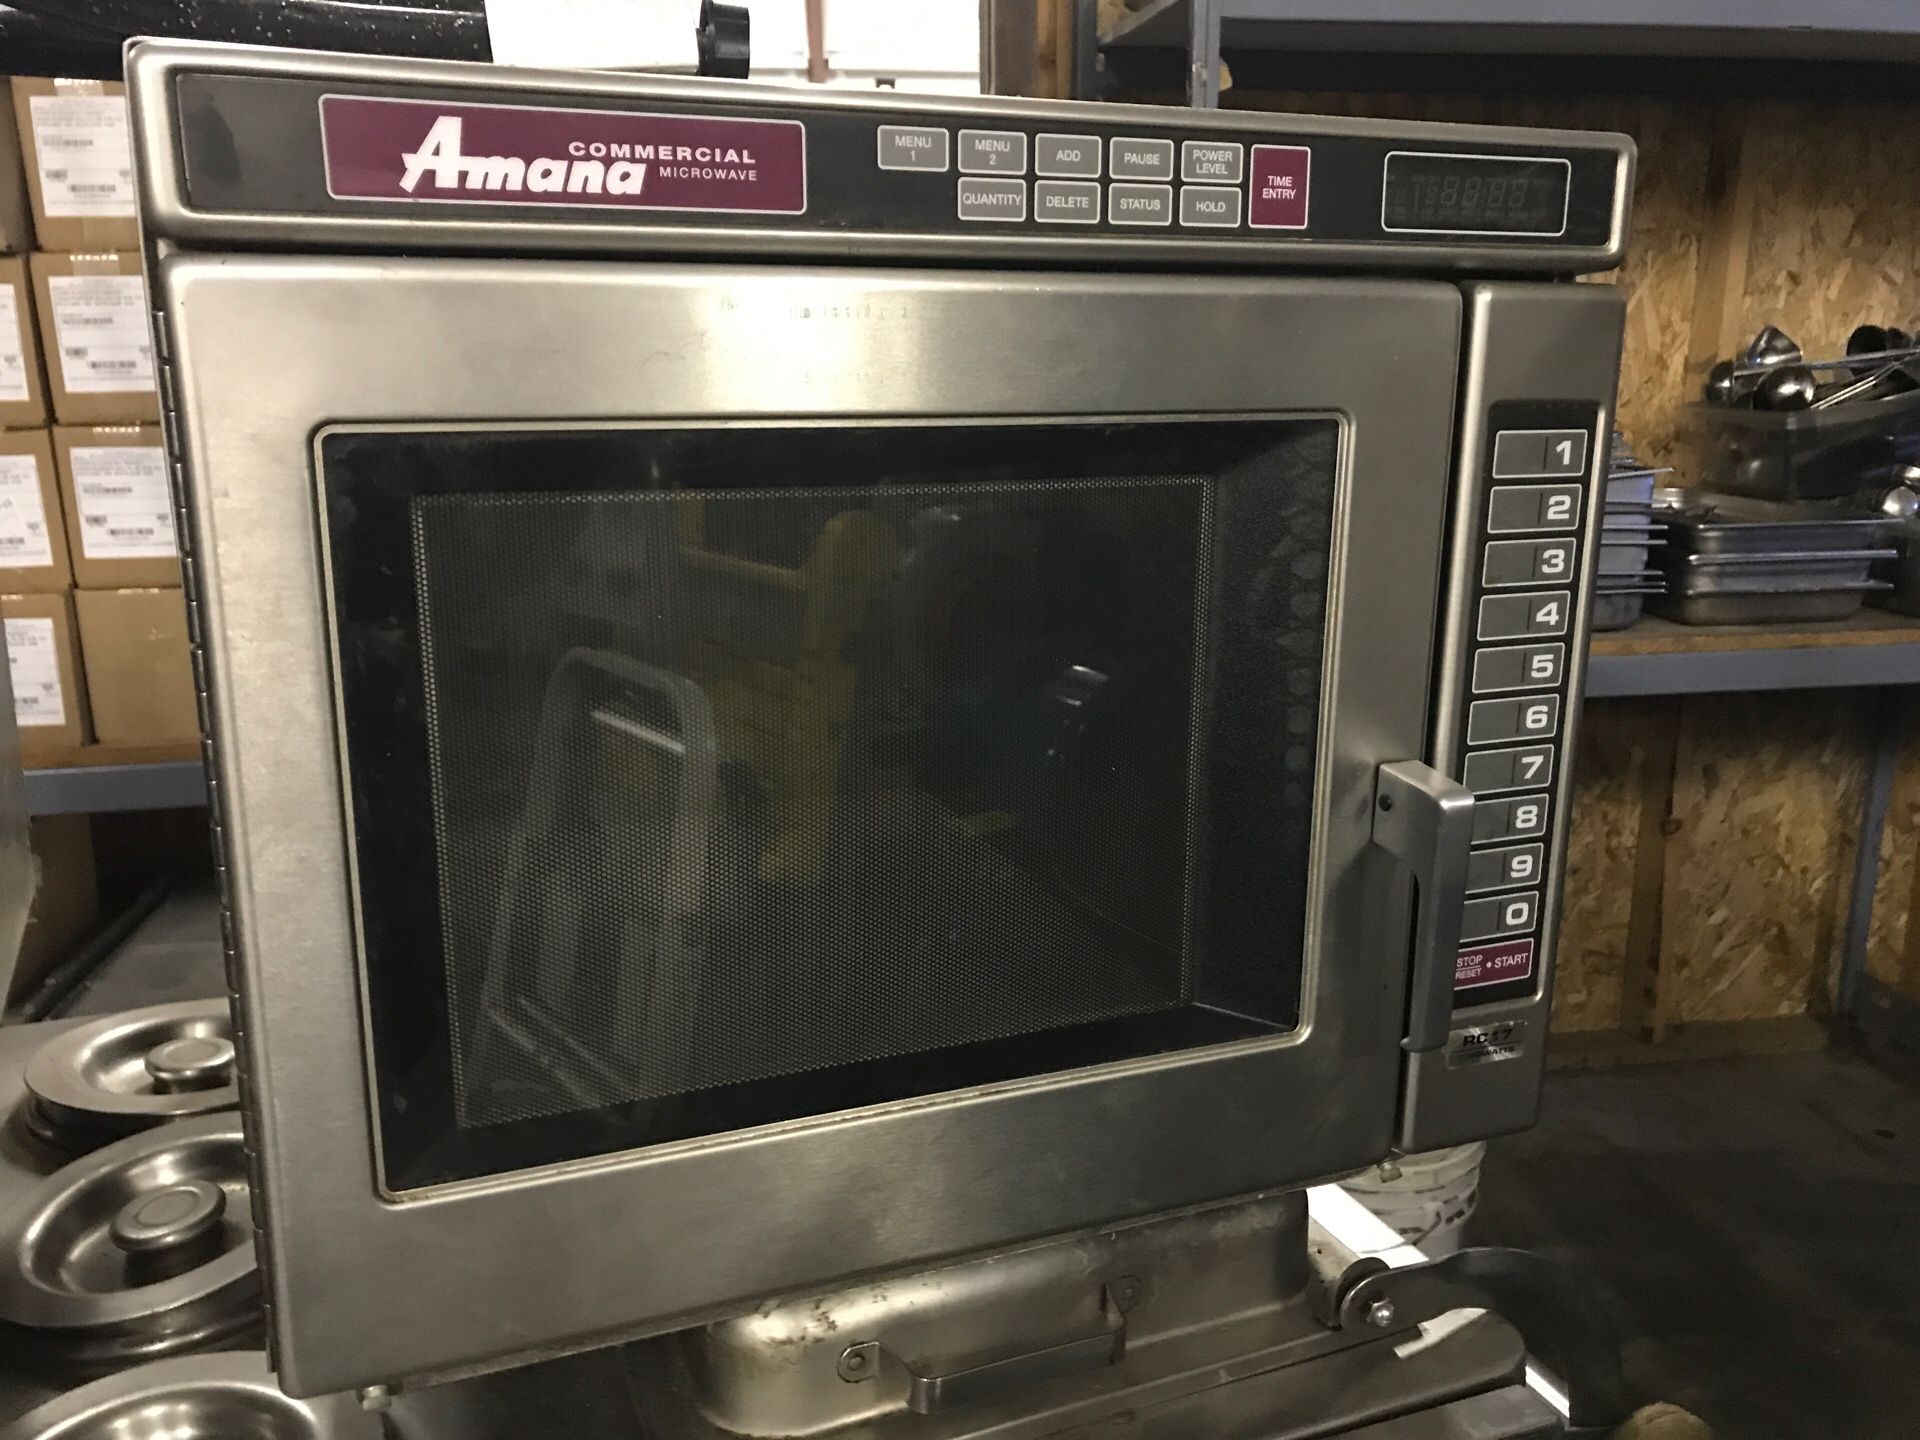 To Amana 220 V commercial microwaves